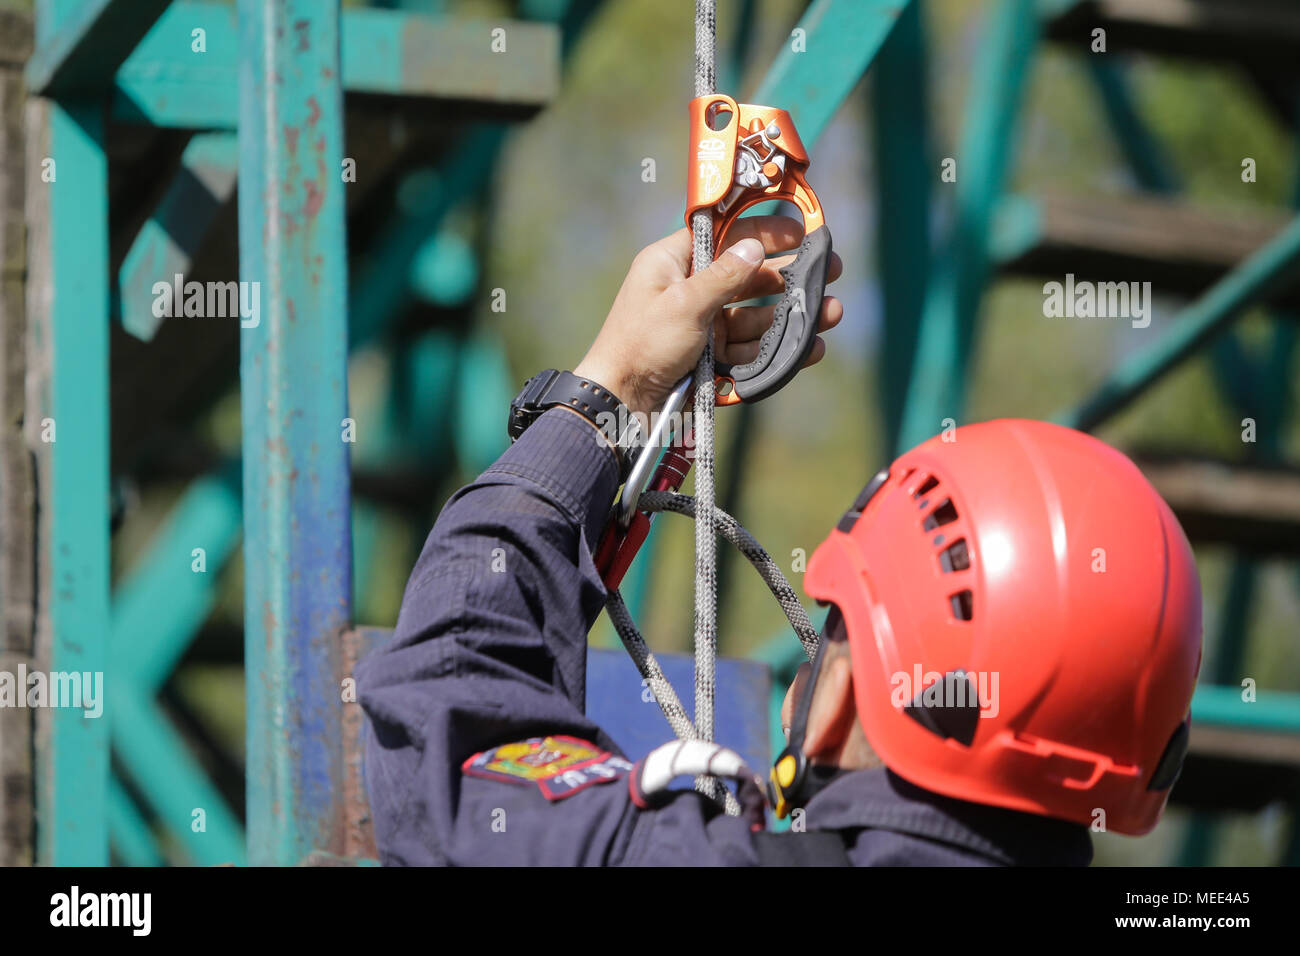 BUCHAREST, ROMANIA - APRIL 21: Firefighters are rappelling and climbing ropes at a drill exercise, on April 21, 2017, in Bucharest Stock Photo